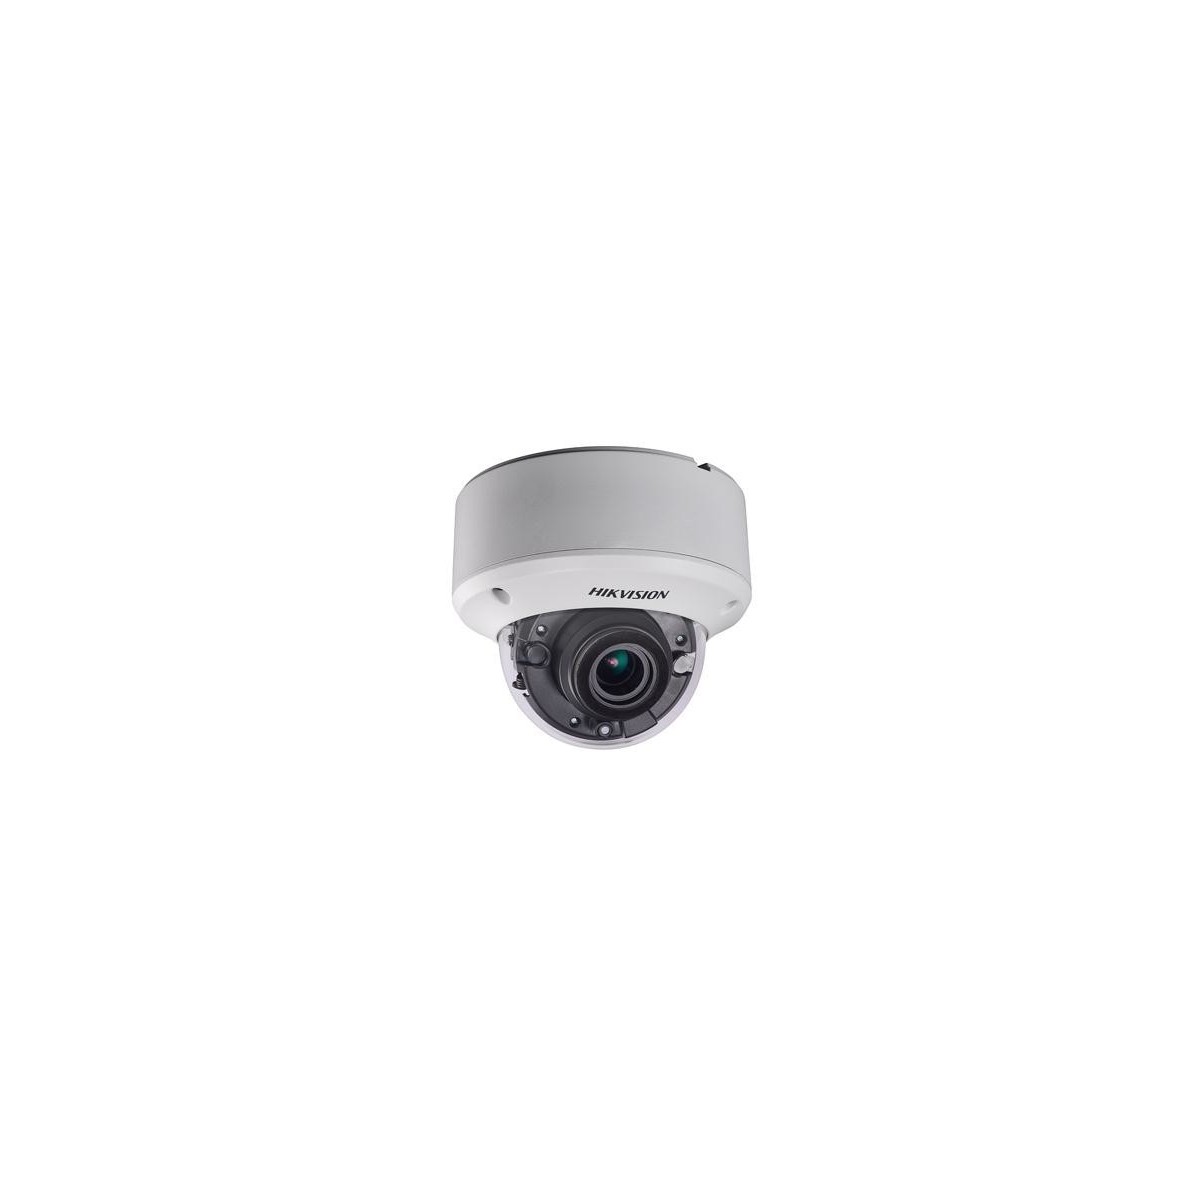 Hikvision Digital Technology DS-2CE56D8T-VPIT3ZE - CCTV security camera - indoor & outdoor - Wired - Simplified Chinese - Englis